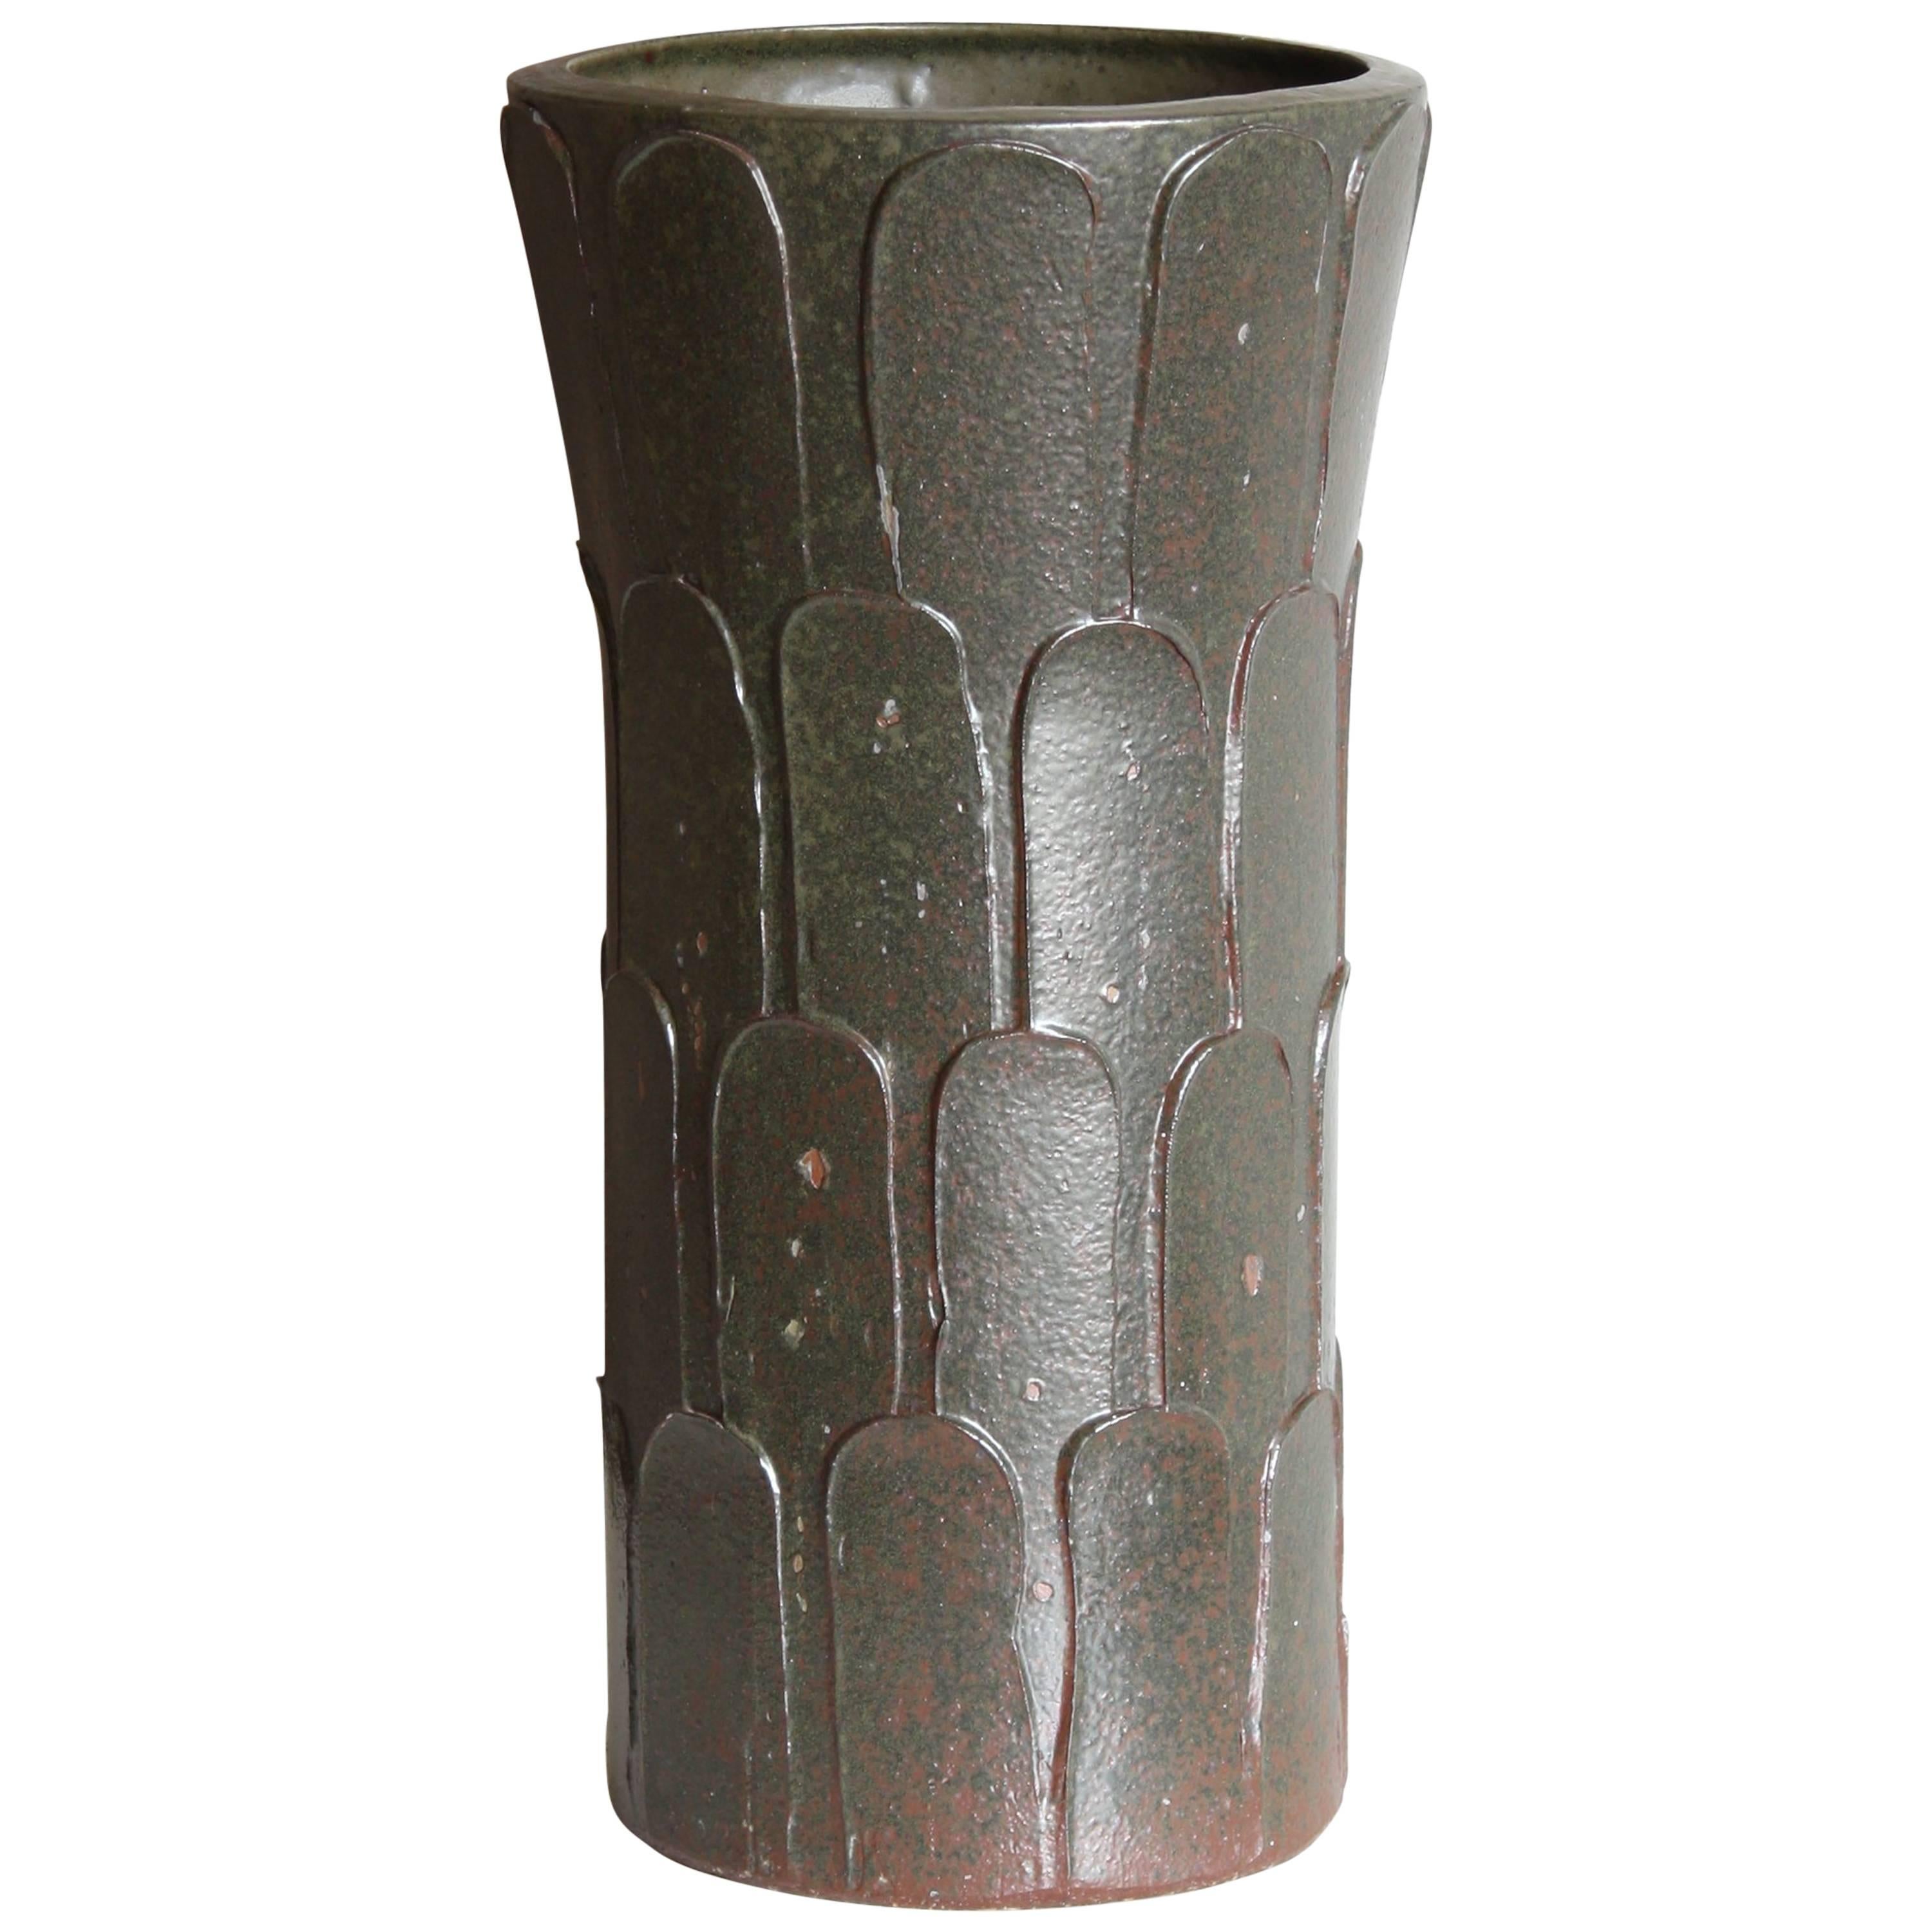 Large Umbrella Stand or Pot by David Cressey for Architectural Pottery